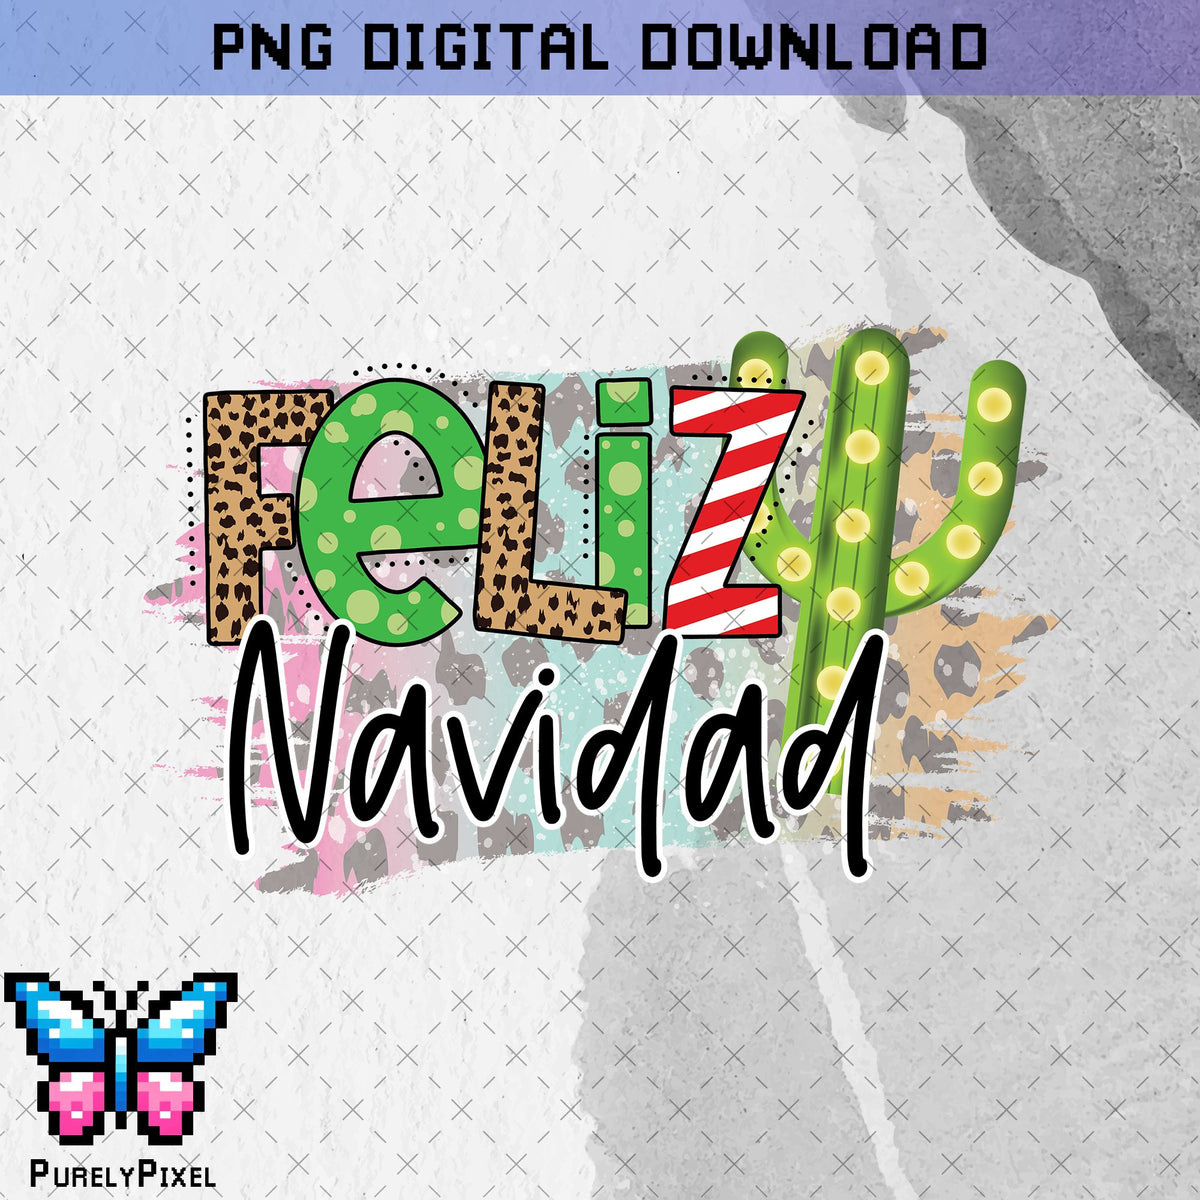 Feliz Navidad PNG | Christmas and Winter Holiday Cactus PNG | Candy Cane Festive PNG Design for T-Shirts and More | PurelyPixels | Digital Download